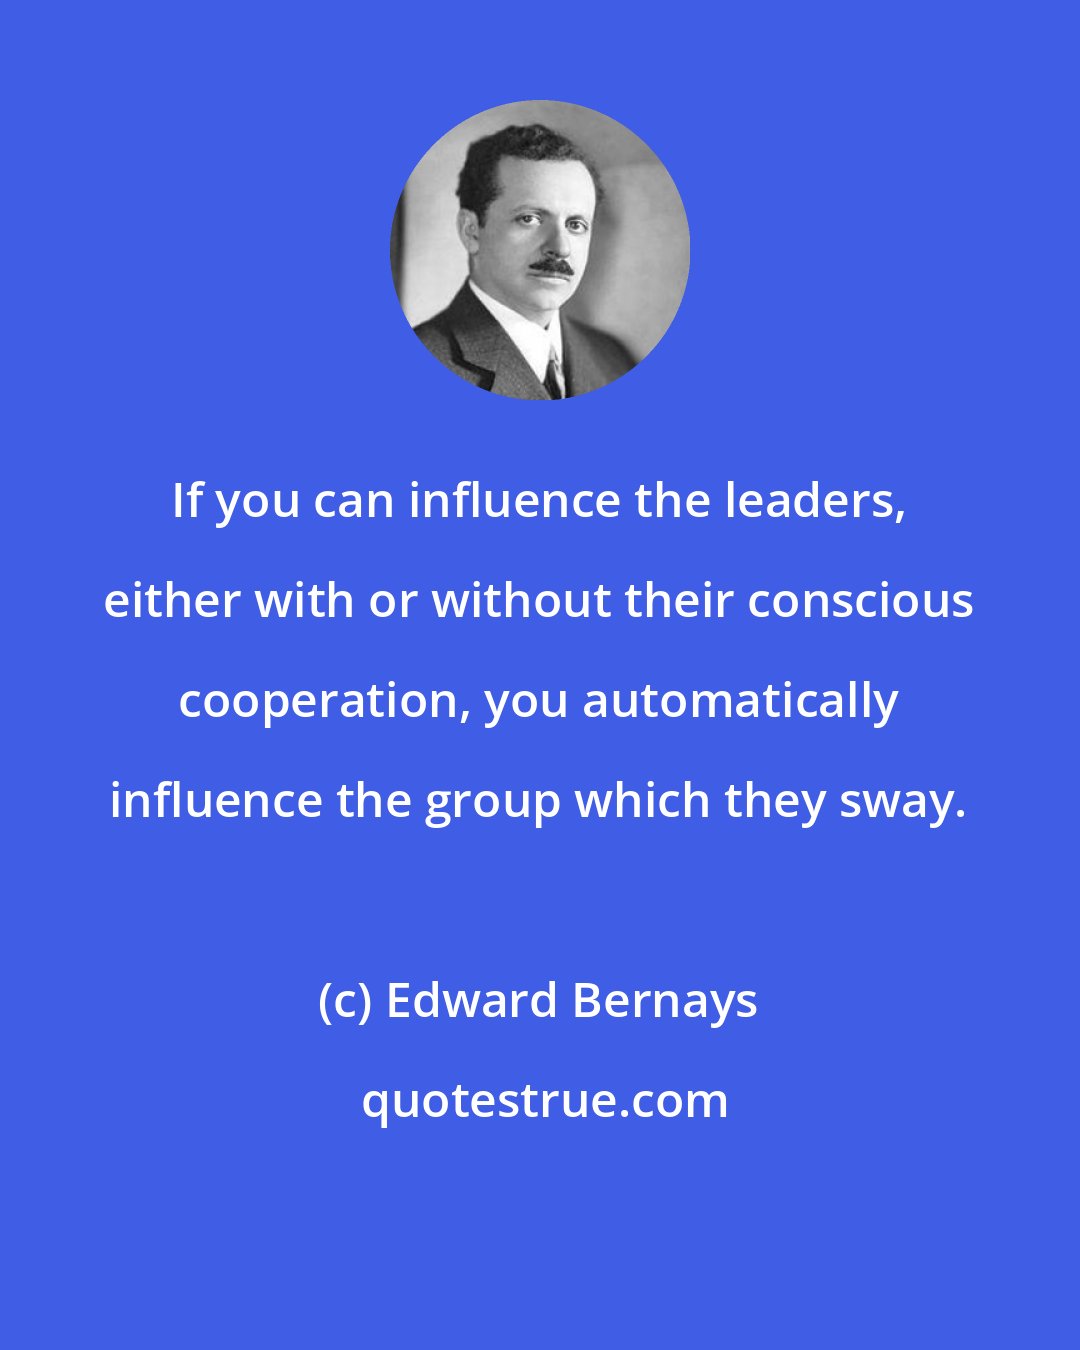 Edward Bernays: If you can influence the leaders, either with or without their conscious cooperation, you automatically influence the group which they sway.